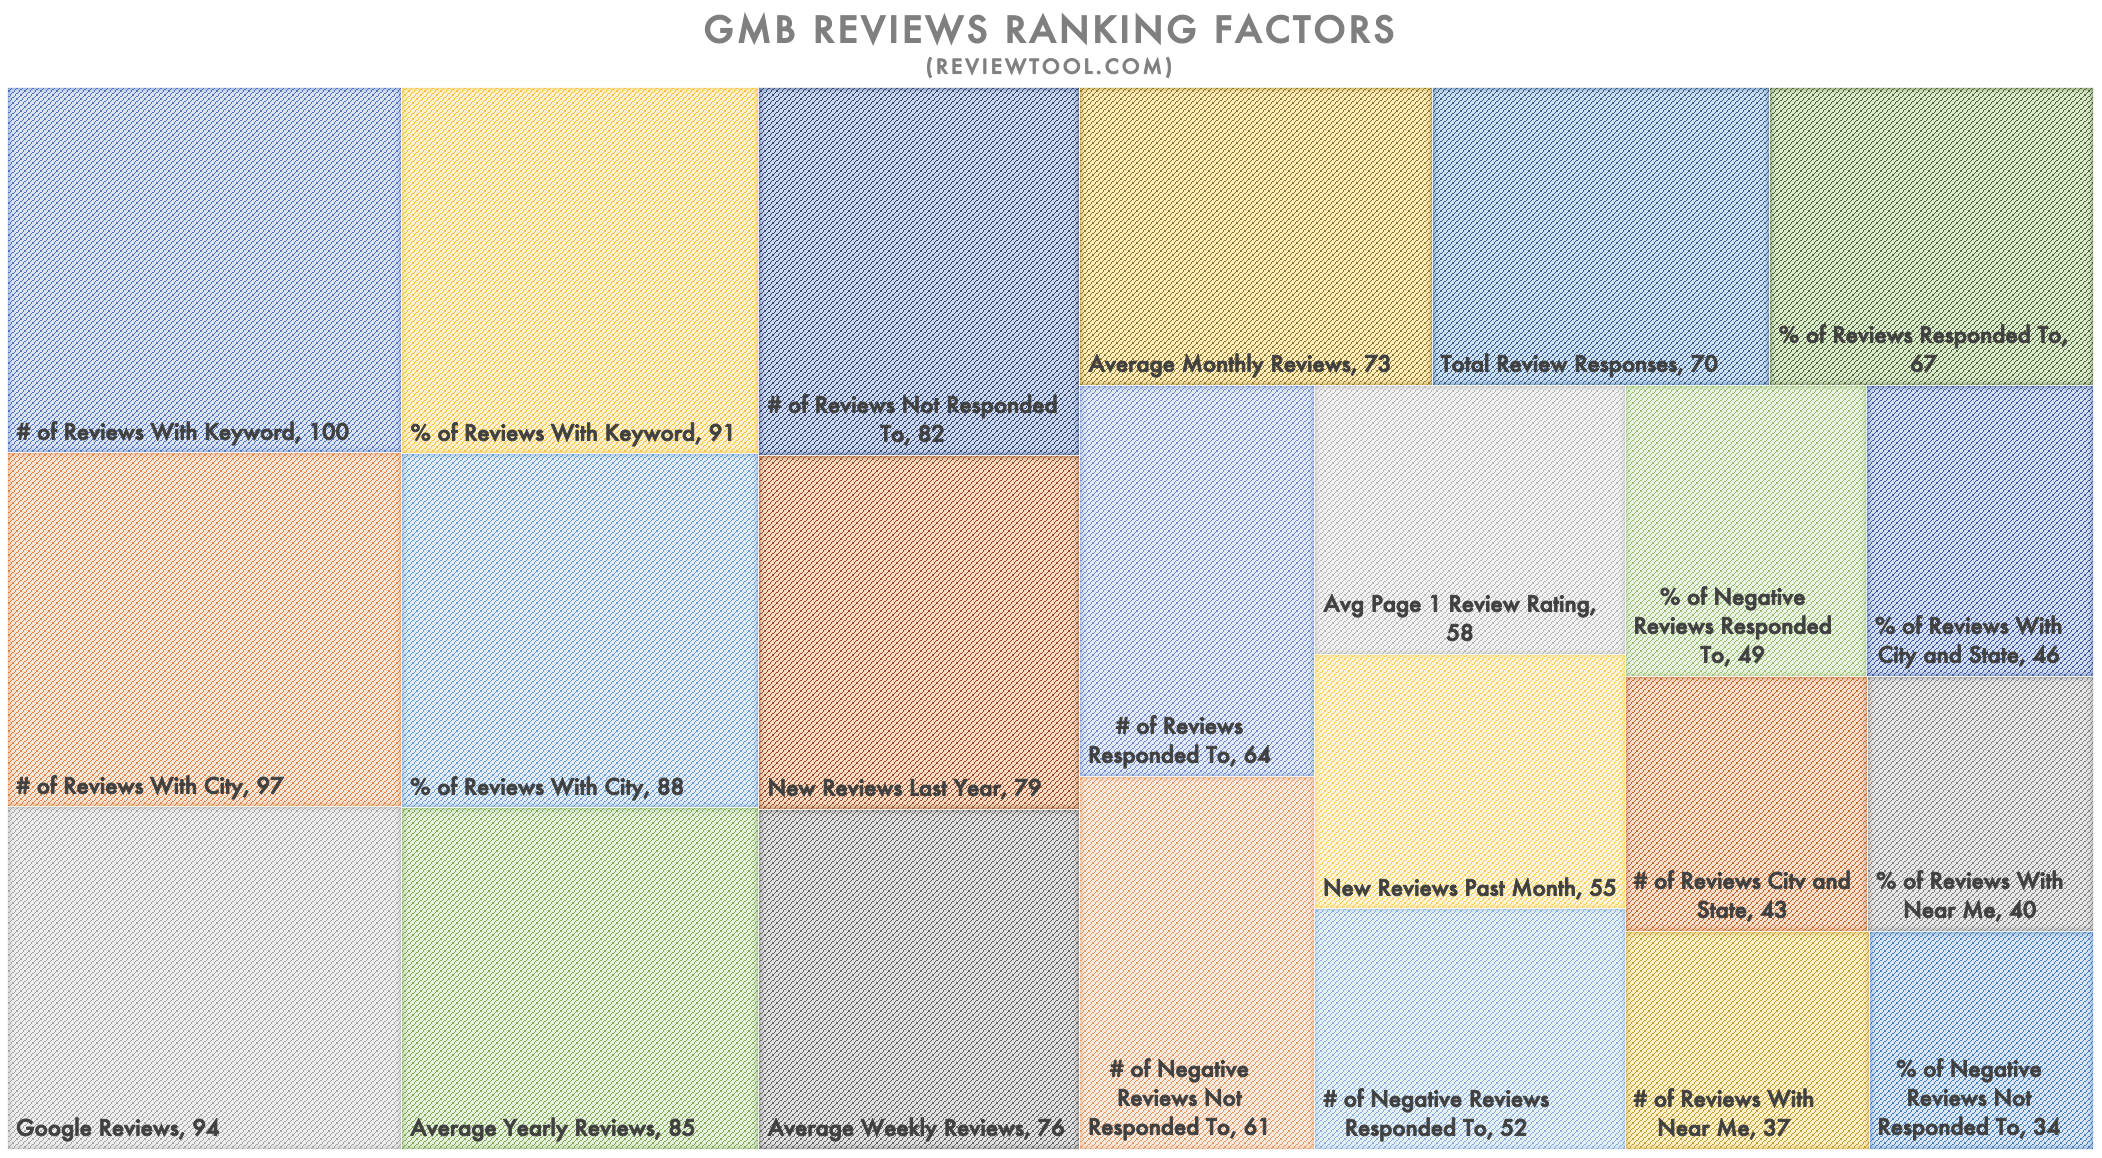 GMB Reviews-Related Ranking Factors